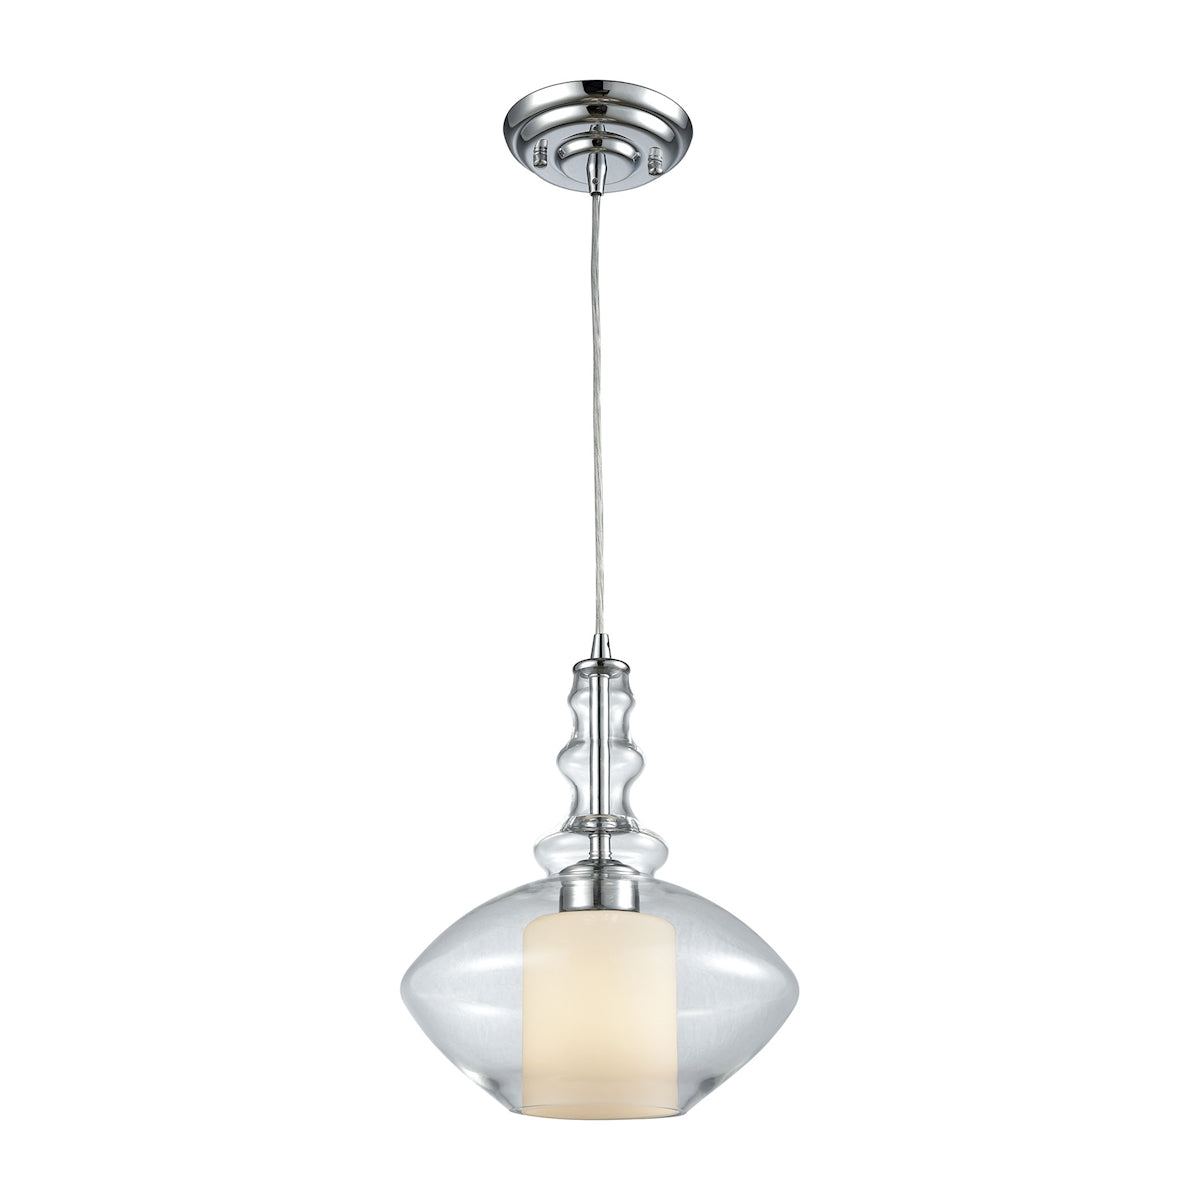 ELK Lighting 56500/1 Alora 1-Light Mini Pendant in Chrome with Clear and Opal White Glass